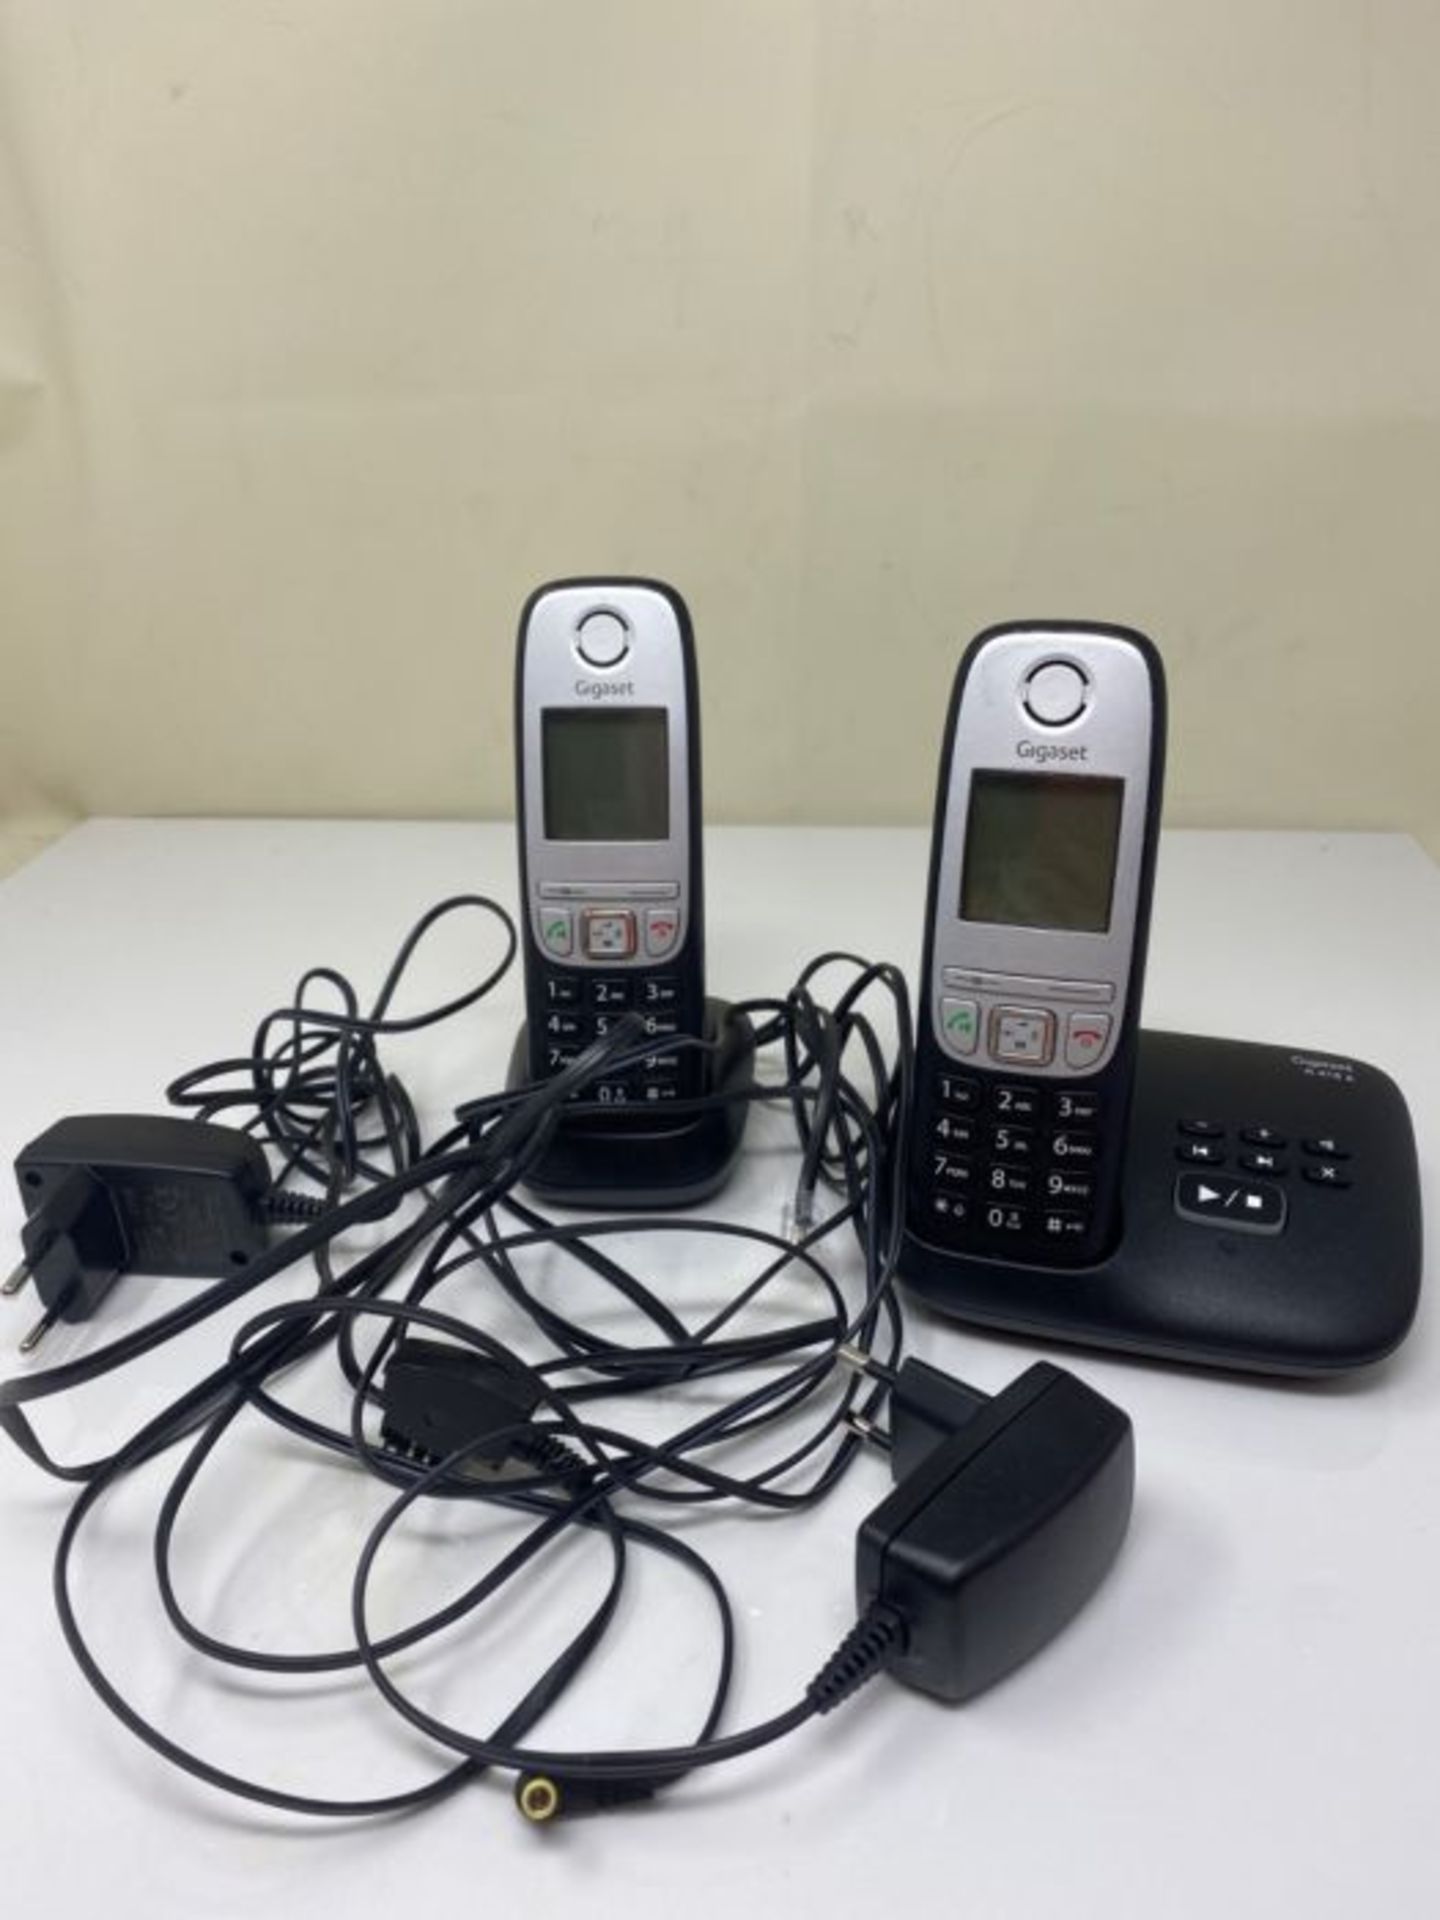 Gigaset A415A Duo Cordless Phone - Black - Image 2 of 2